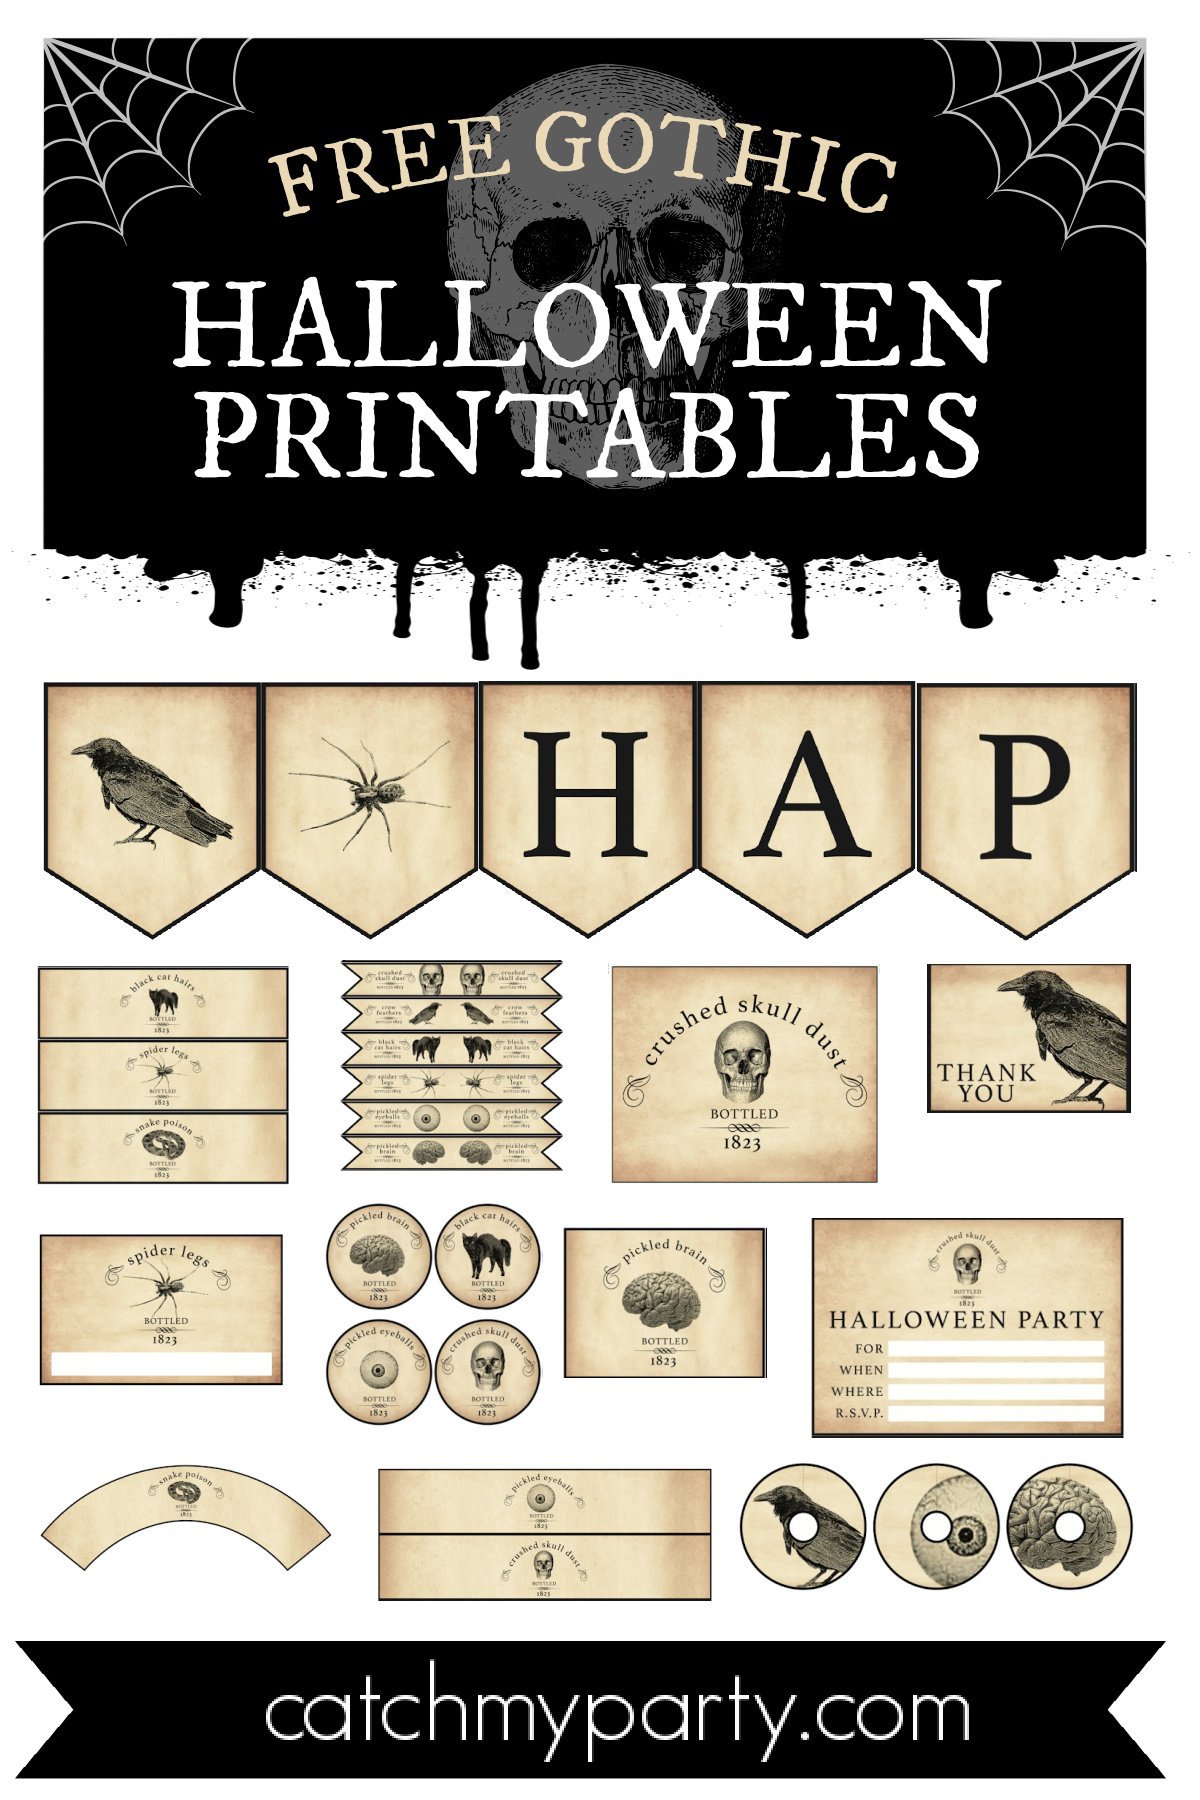 Download the Best FREE Gothic Halloween Party Printables!